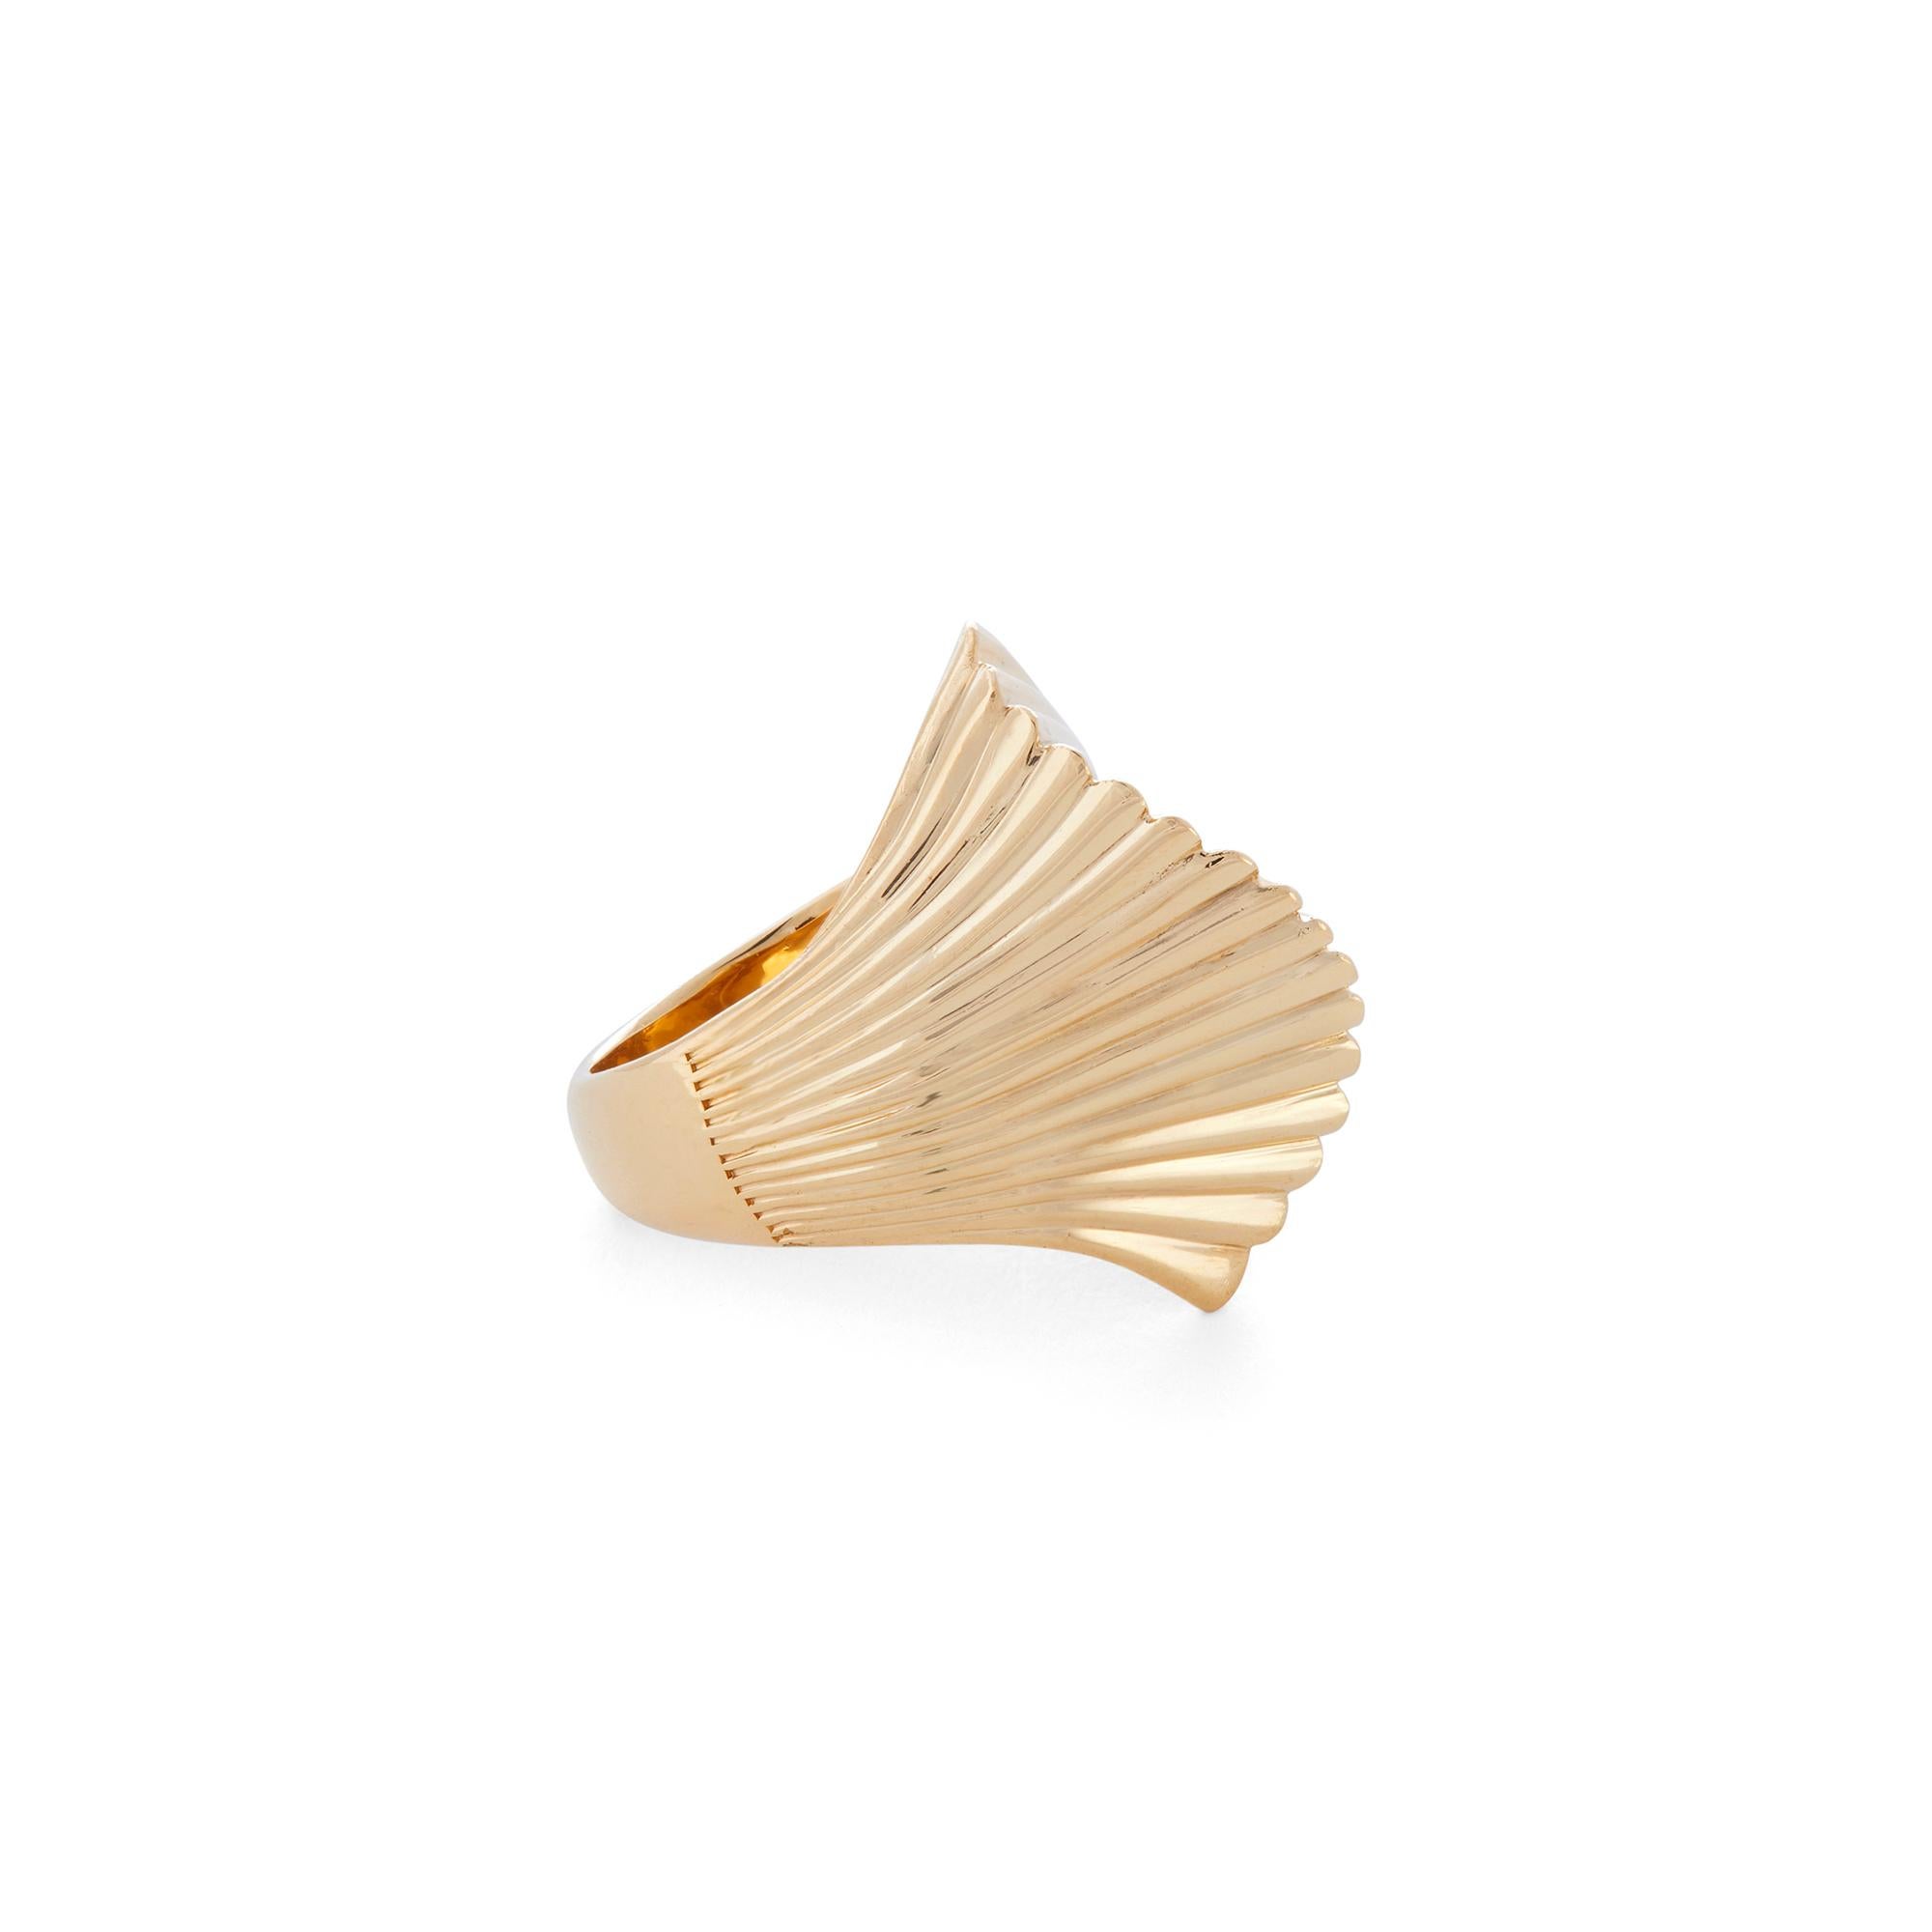 Authentic Cartier ring crafted in 18 karat yellow gold.  The fluted dome features a sensuous curve down the center resulting in a fan-like effect.  Size 6 1/4. Signed Cartier, 18k with serial number.  CIRCA 1980s

Brand: Cartier
Metal:  18k Yellow